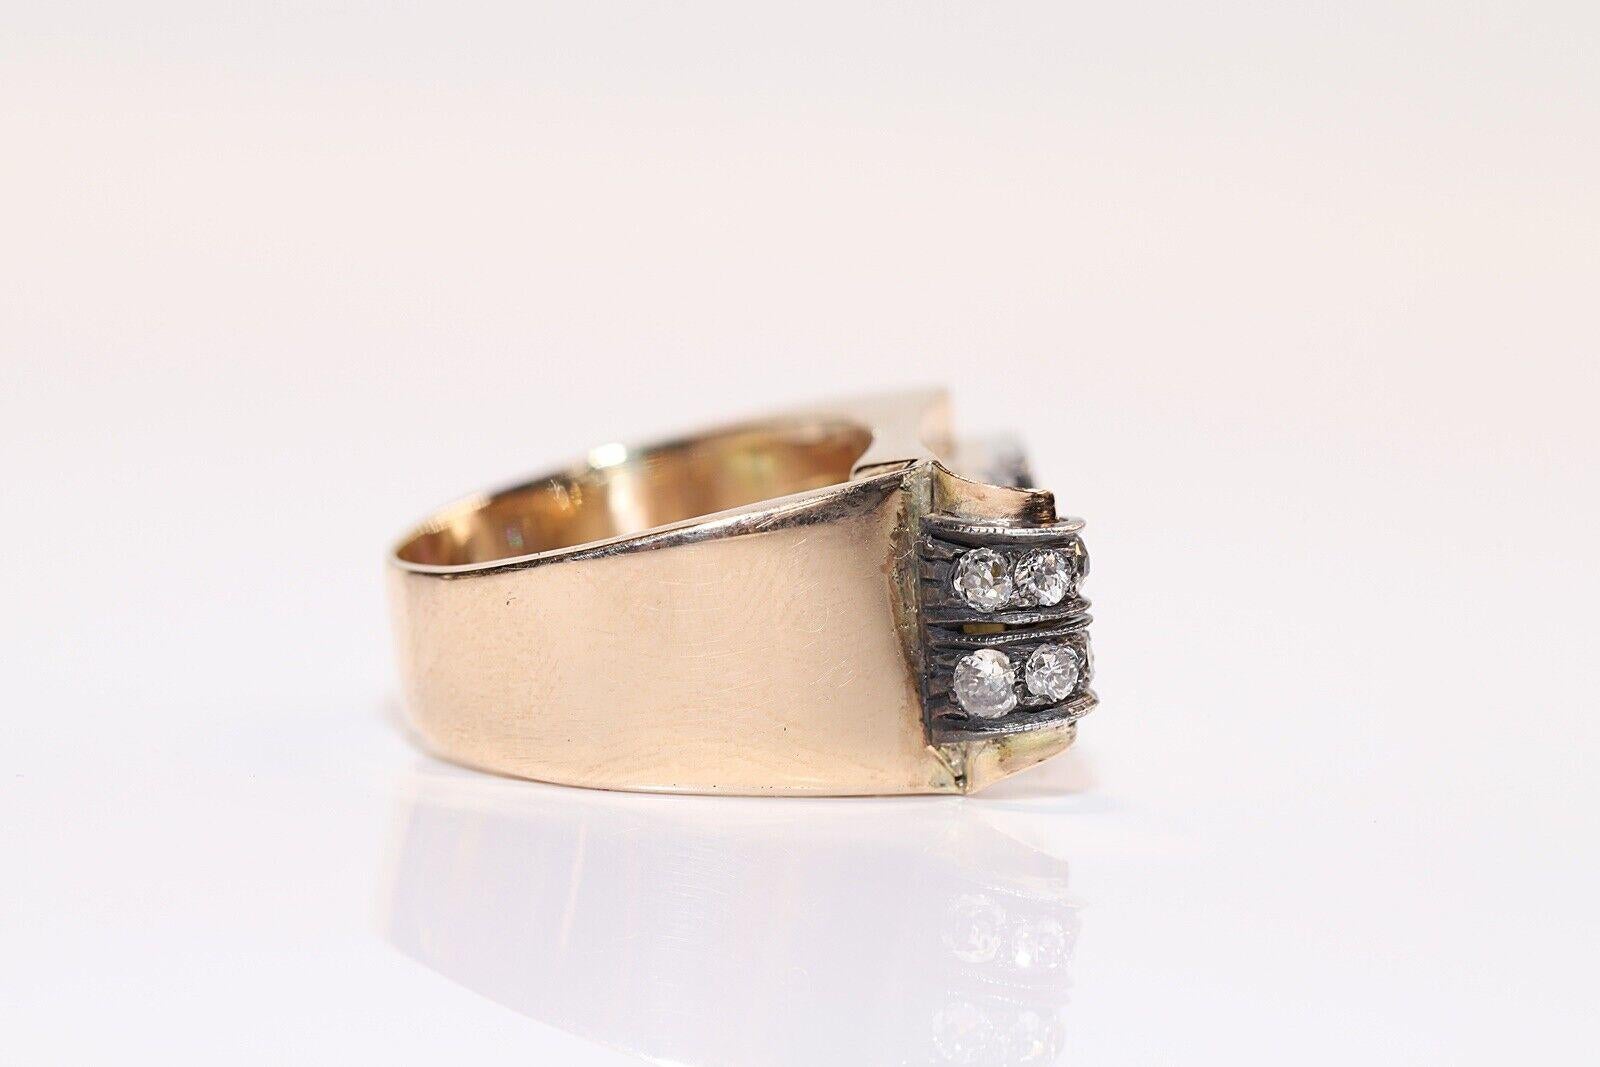 Anitique Cİrca 1900s 14k Gold Natural Diamond Decorated Tank Ring  In Good Condition For Sale In Fatih/İstanbul, 34